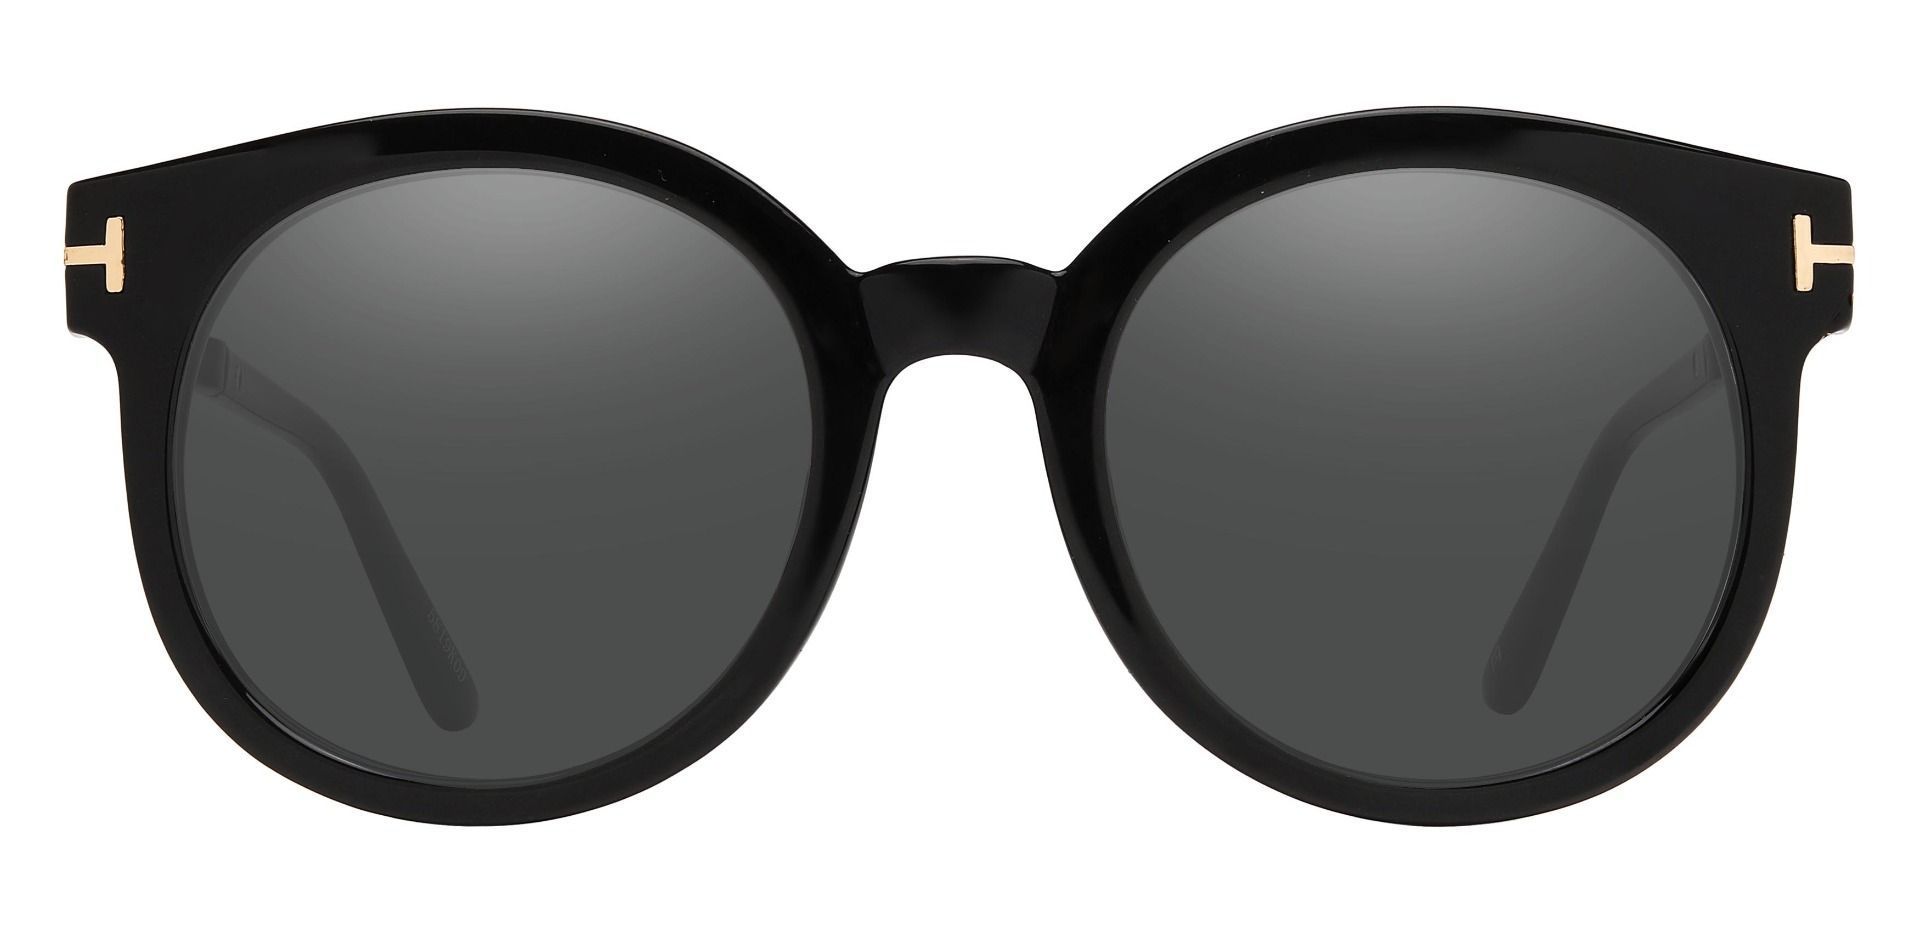 Fortuna Round Reading Sunglasses - Black Frame With Gray Lenses